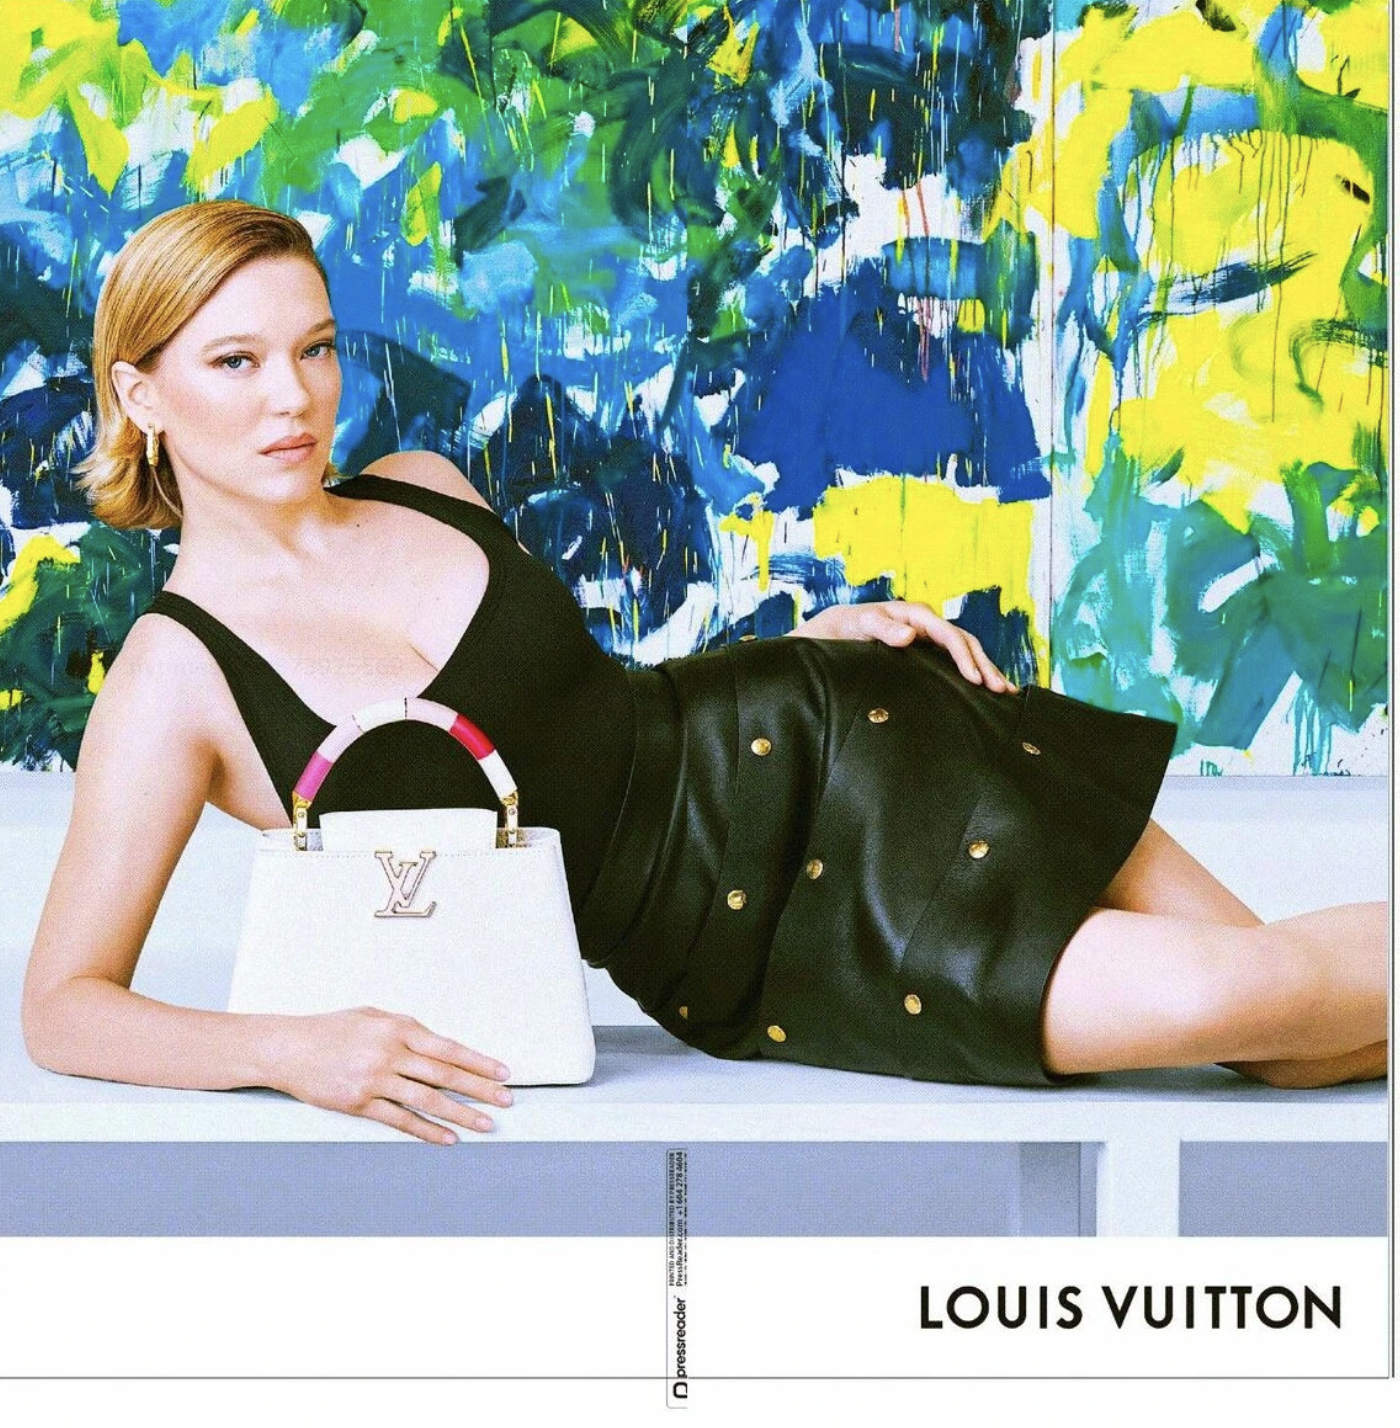 Louis Vuitton launching letter writing collection